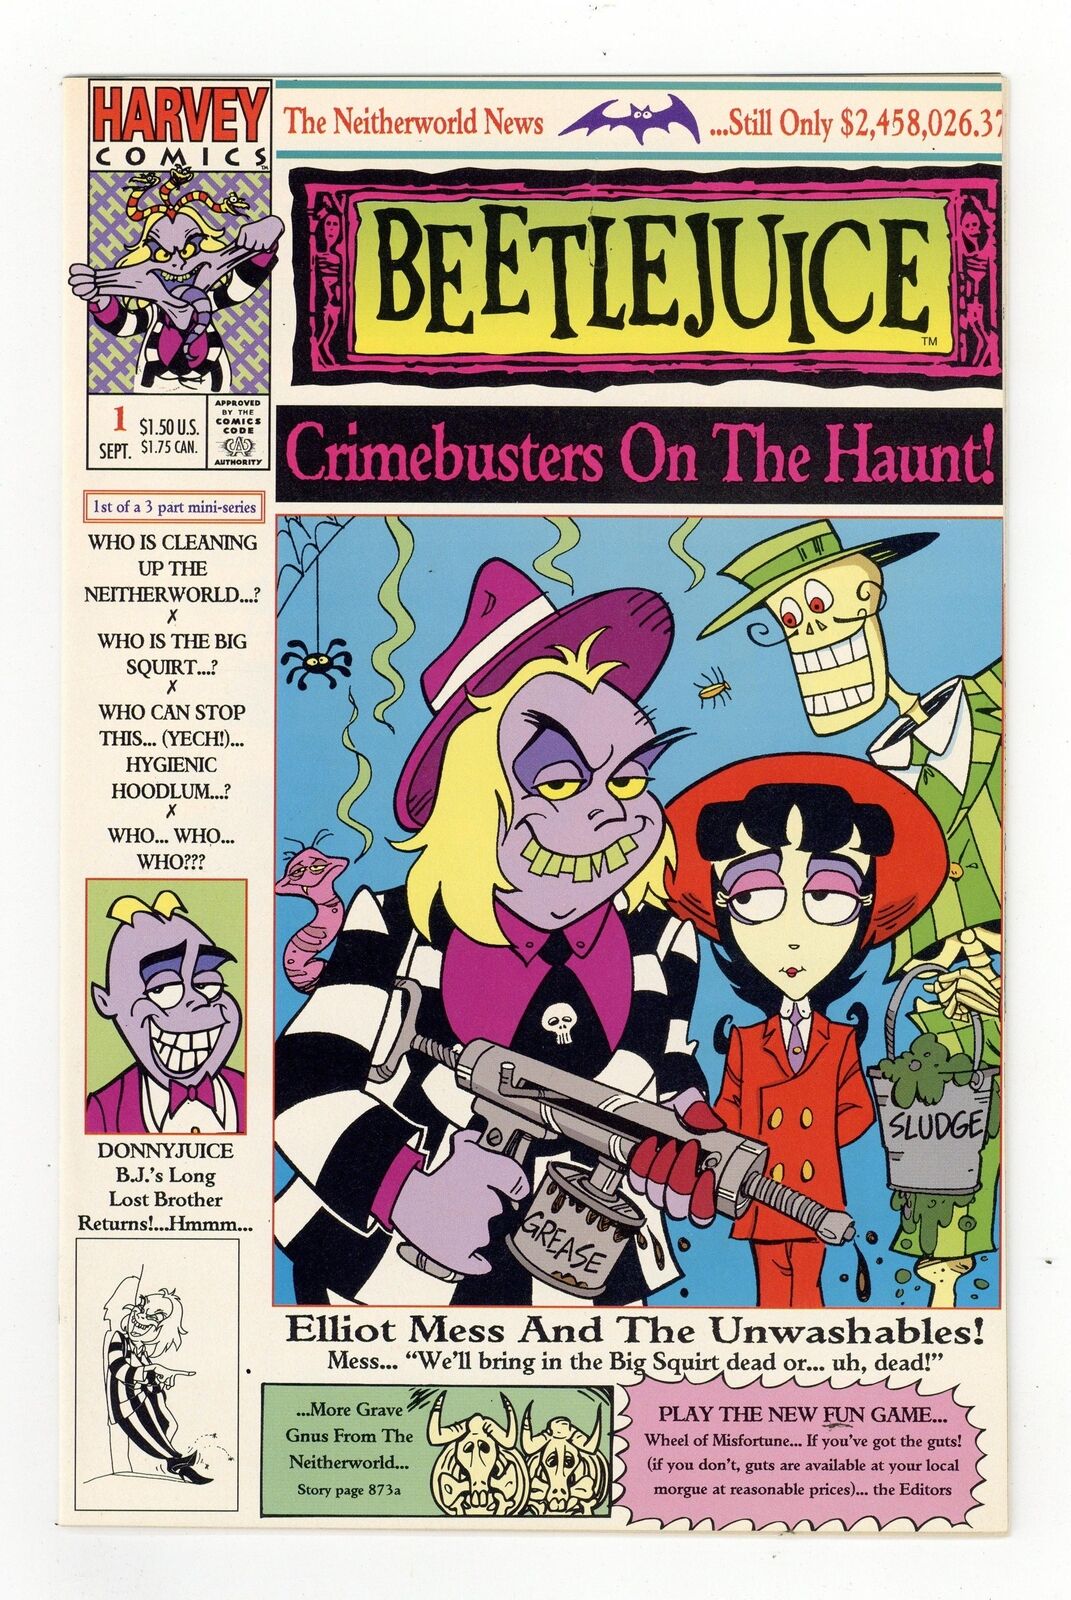 Beetlejuice Crimebusters on the Haunt #1 VF- 7.5 1992